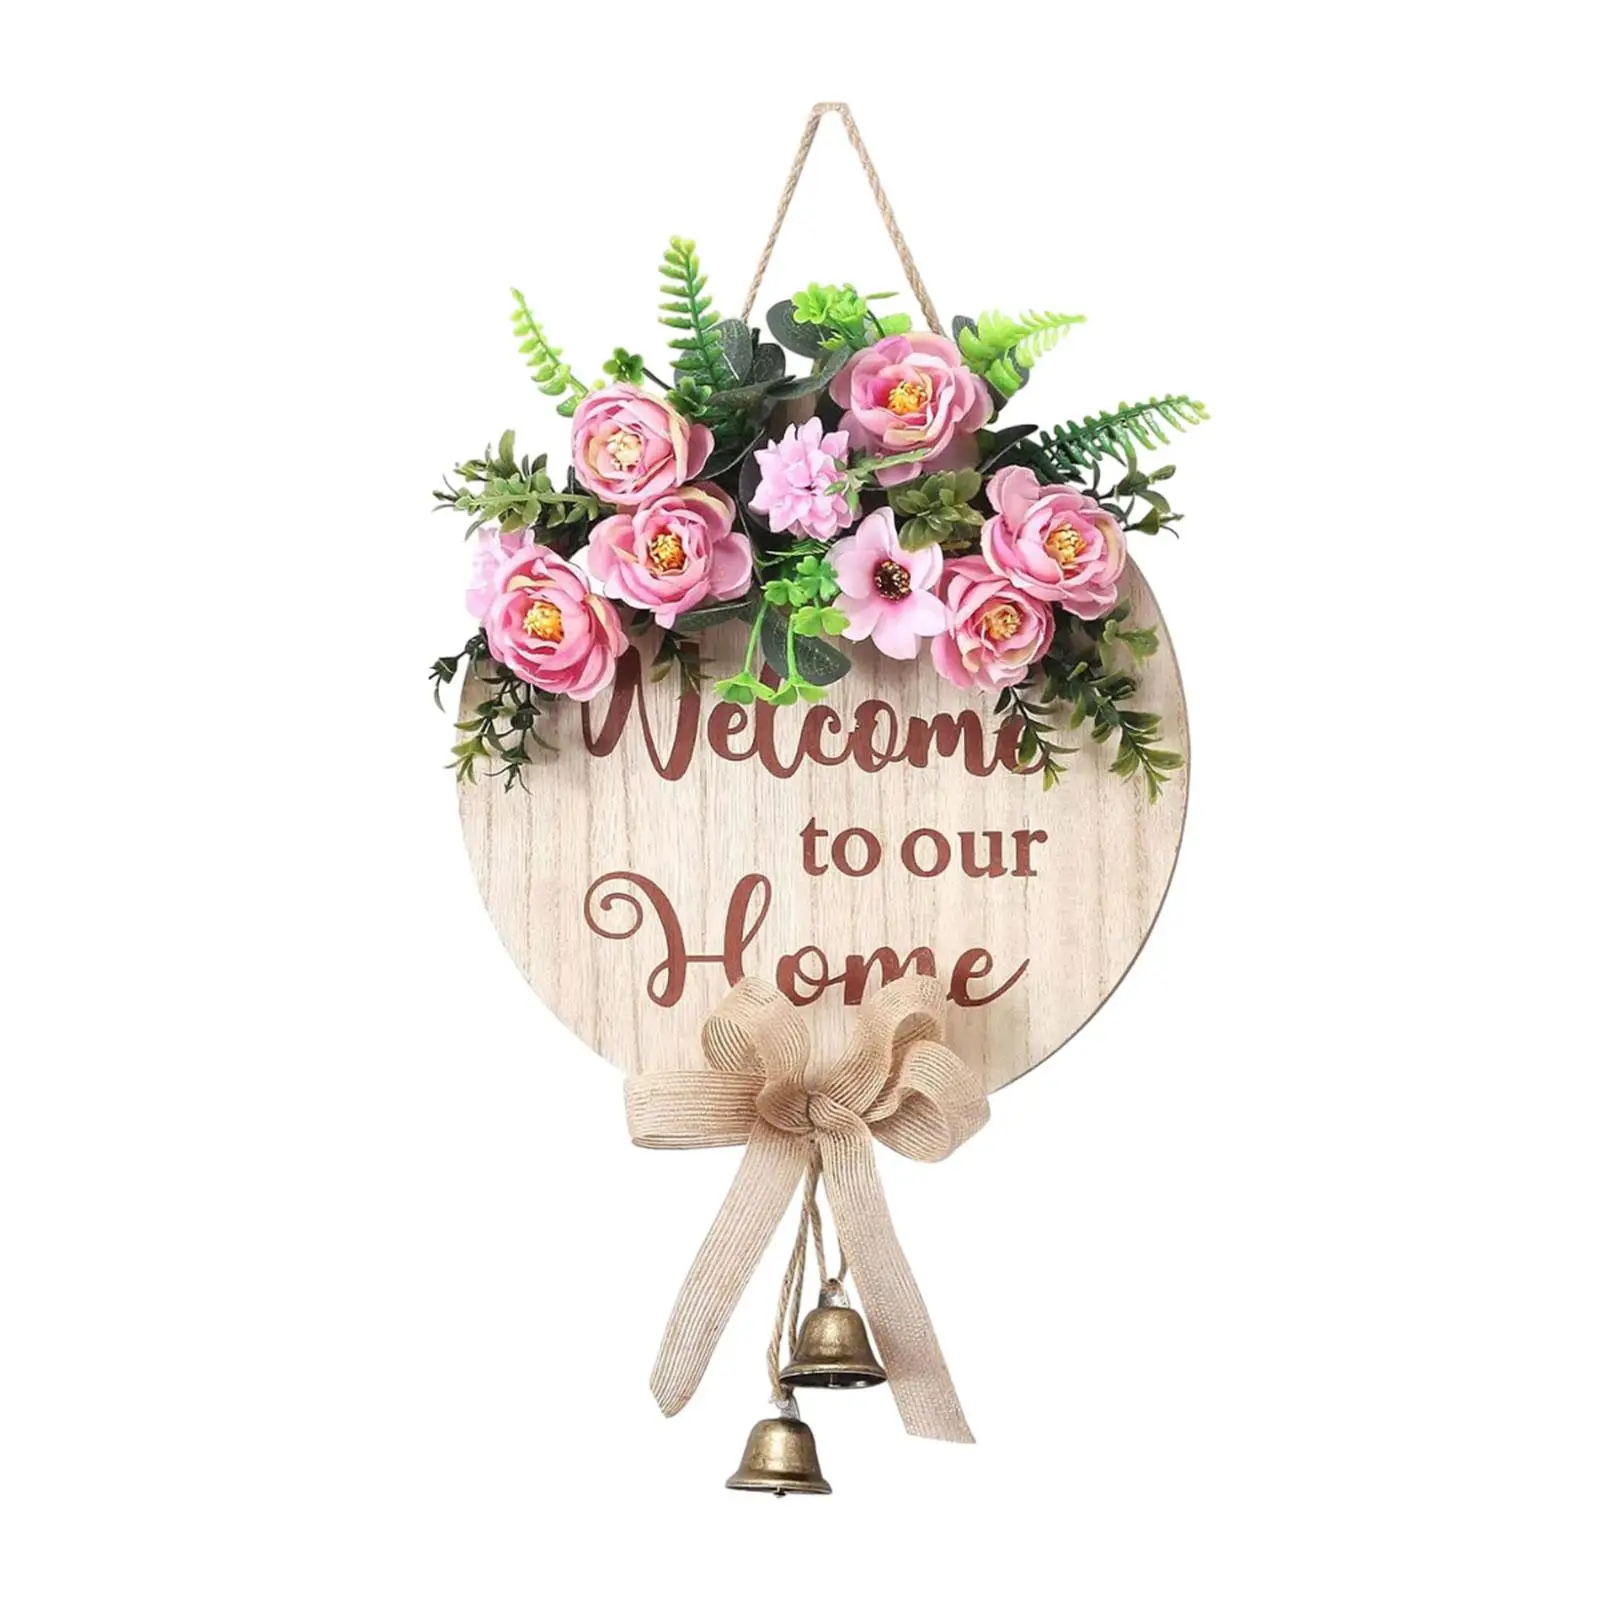 Spring Farmhouse Welcome Sign Outside Spring Wreaths Wooden Hanging Welcome Wreath for Living Room Windows Door Home Decoration